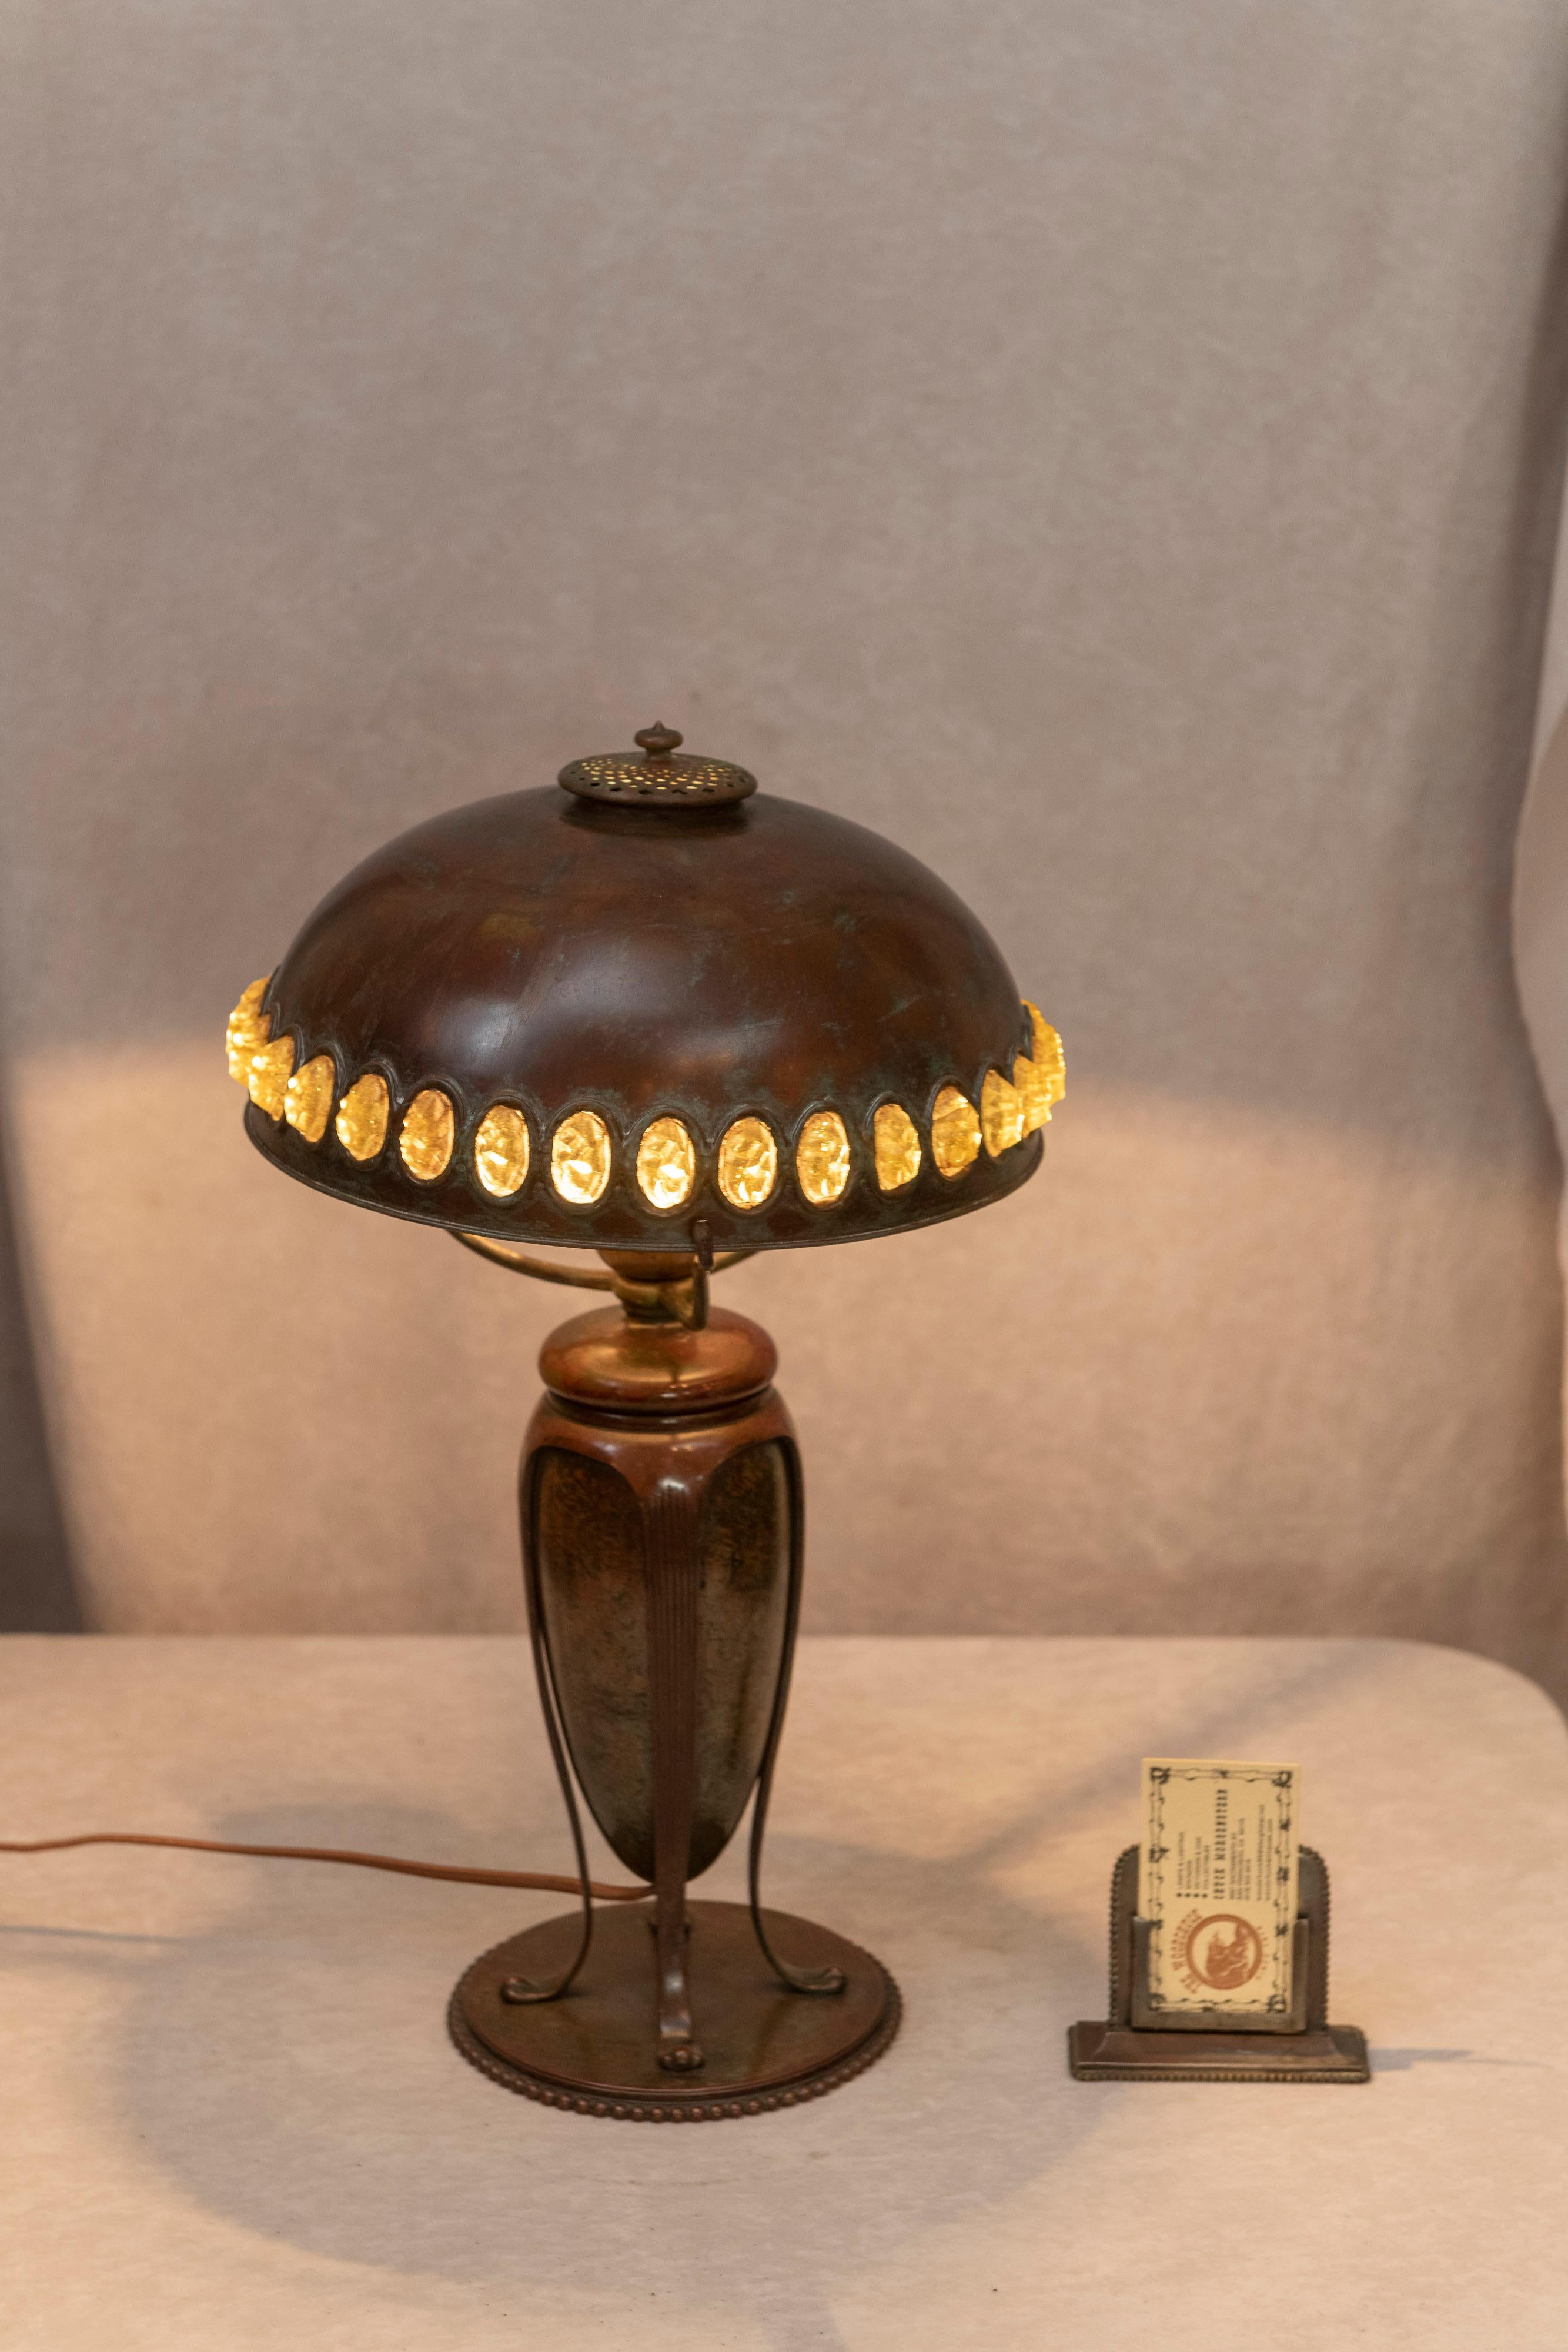 This very handsome lamp was done by the master lamp maker, Tiffany Studios. Rich brown patina and exotic jewels in the shade, and all in bronze make for a great package. An unusual and high quality lamp.